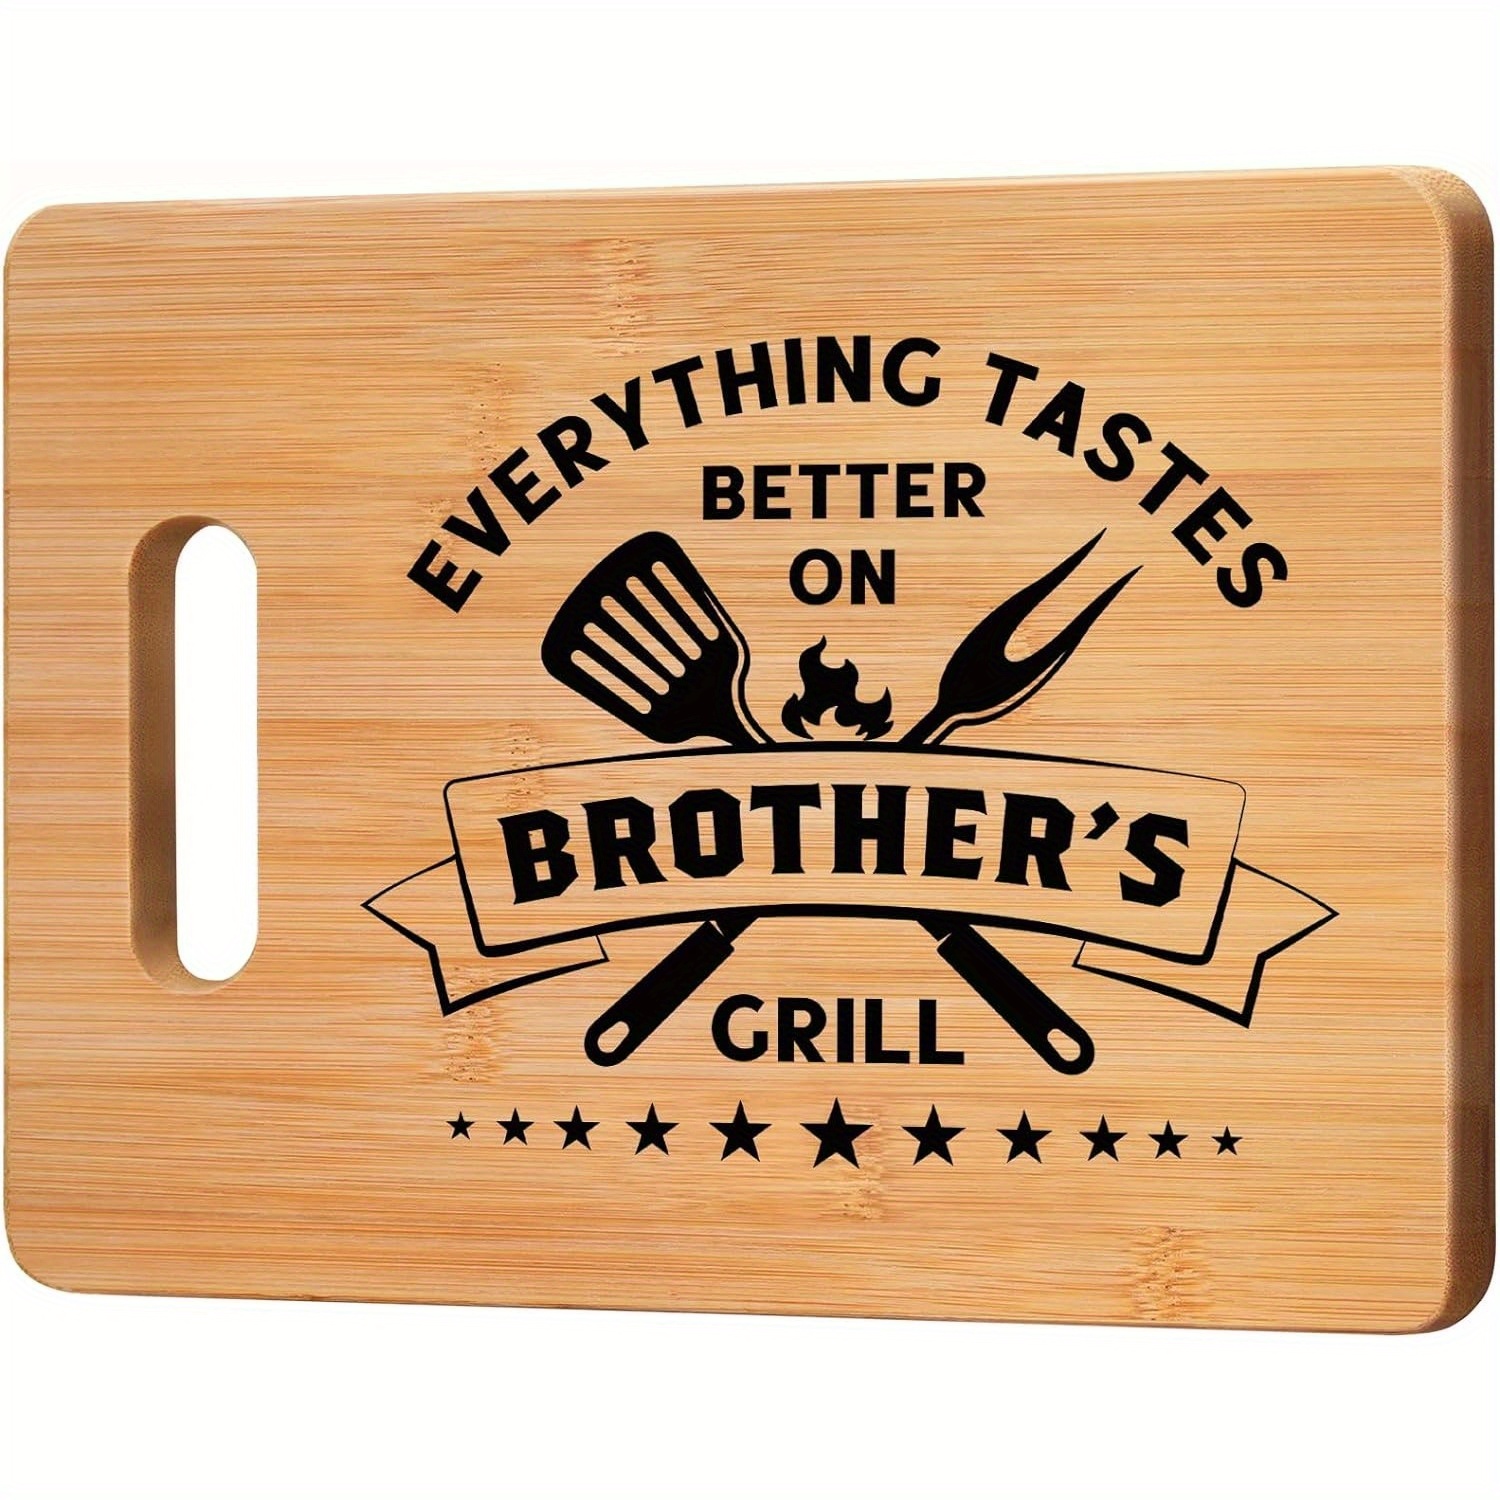 

Brother's Engraved Bamboo Cutting Board - Personalized Birthday Gift For Brother - Durable 5-star Quality Kitchen Accessory - Perfect For Grilling And Food Prep